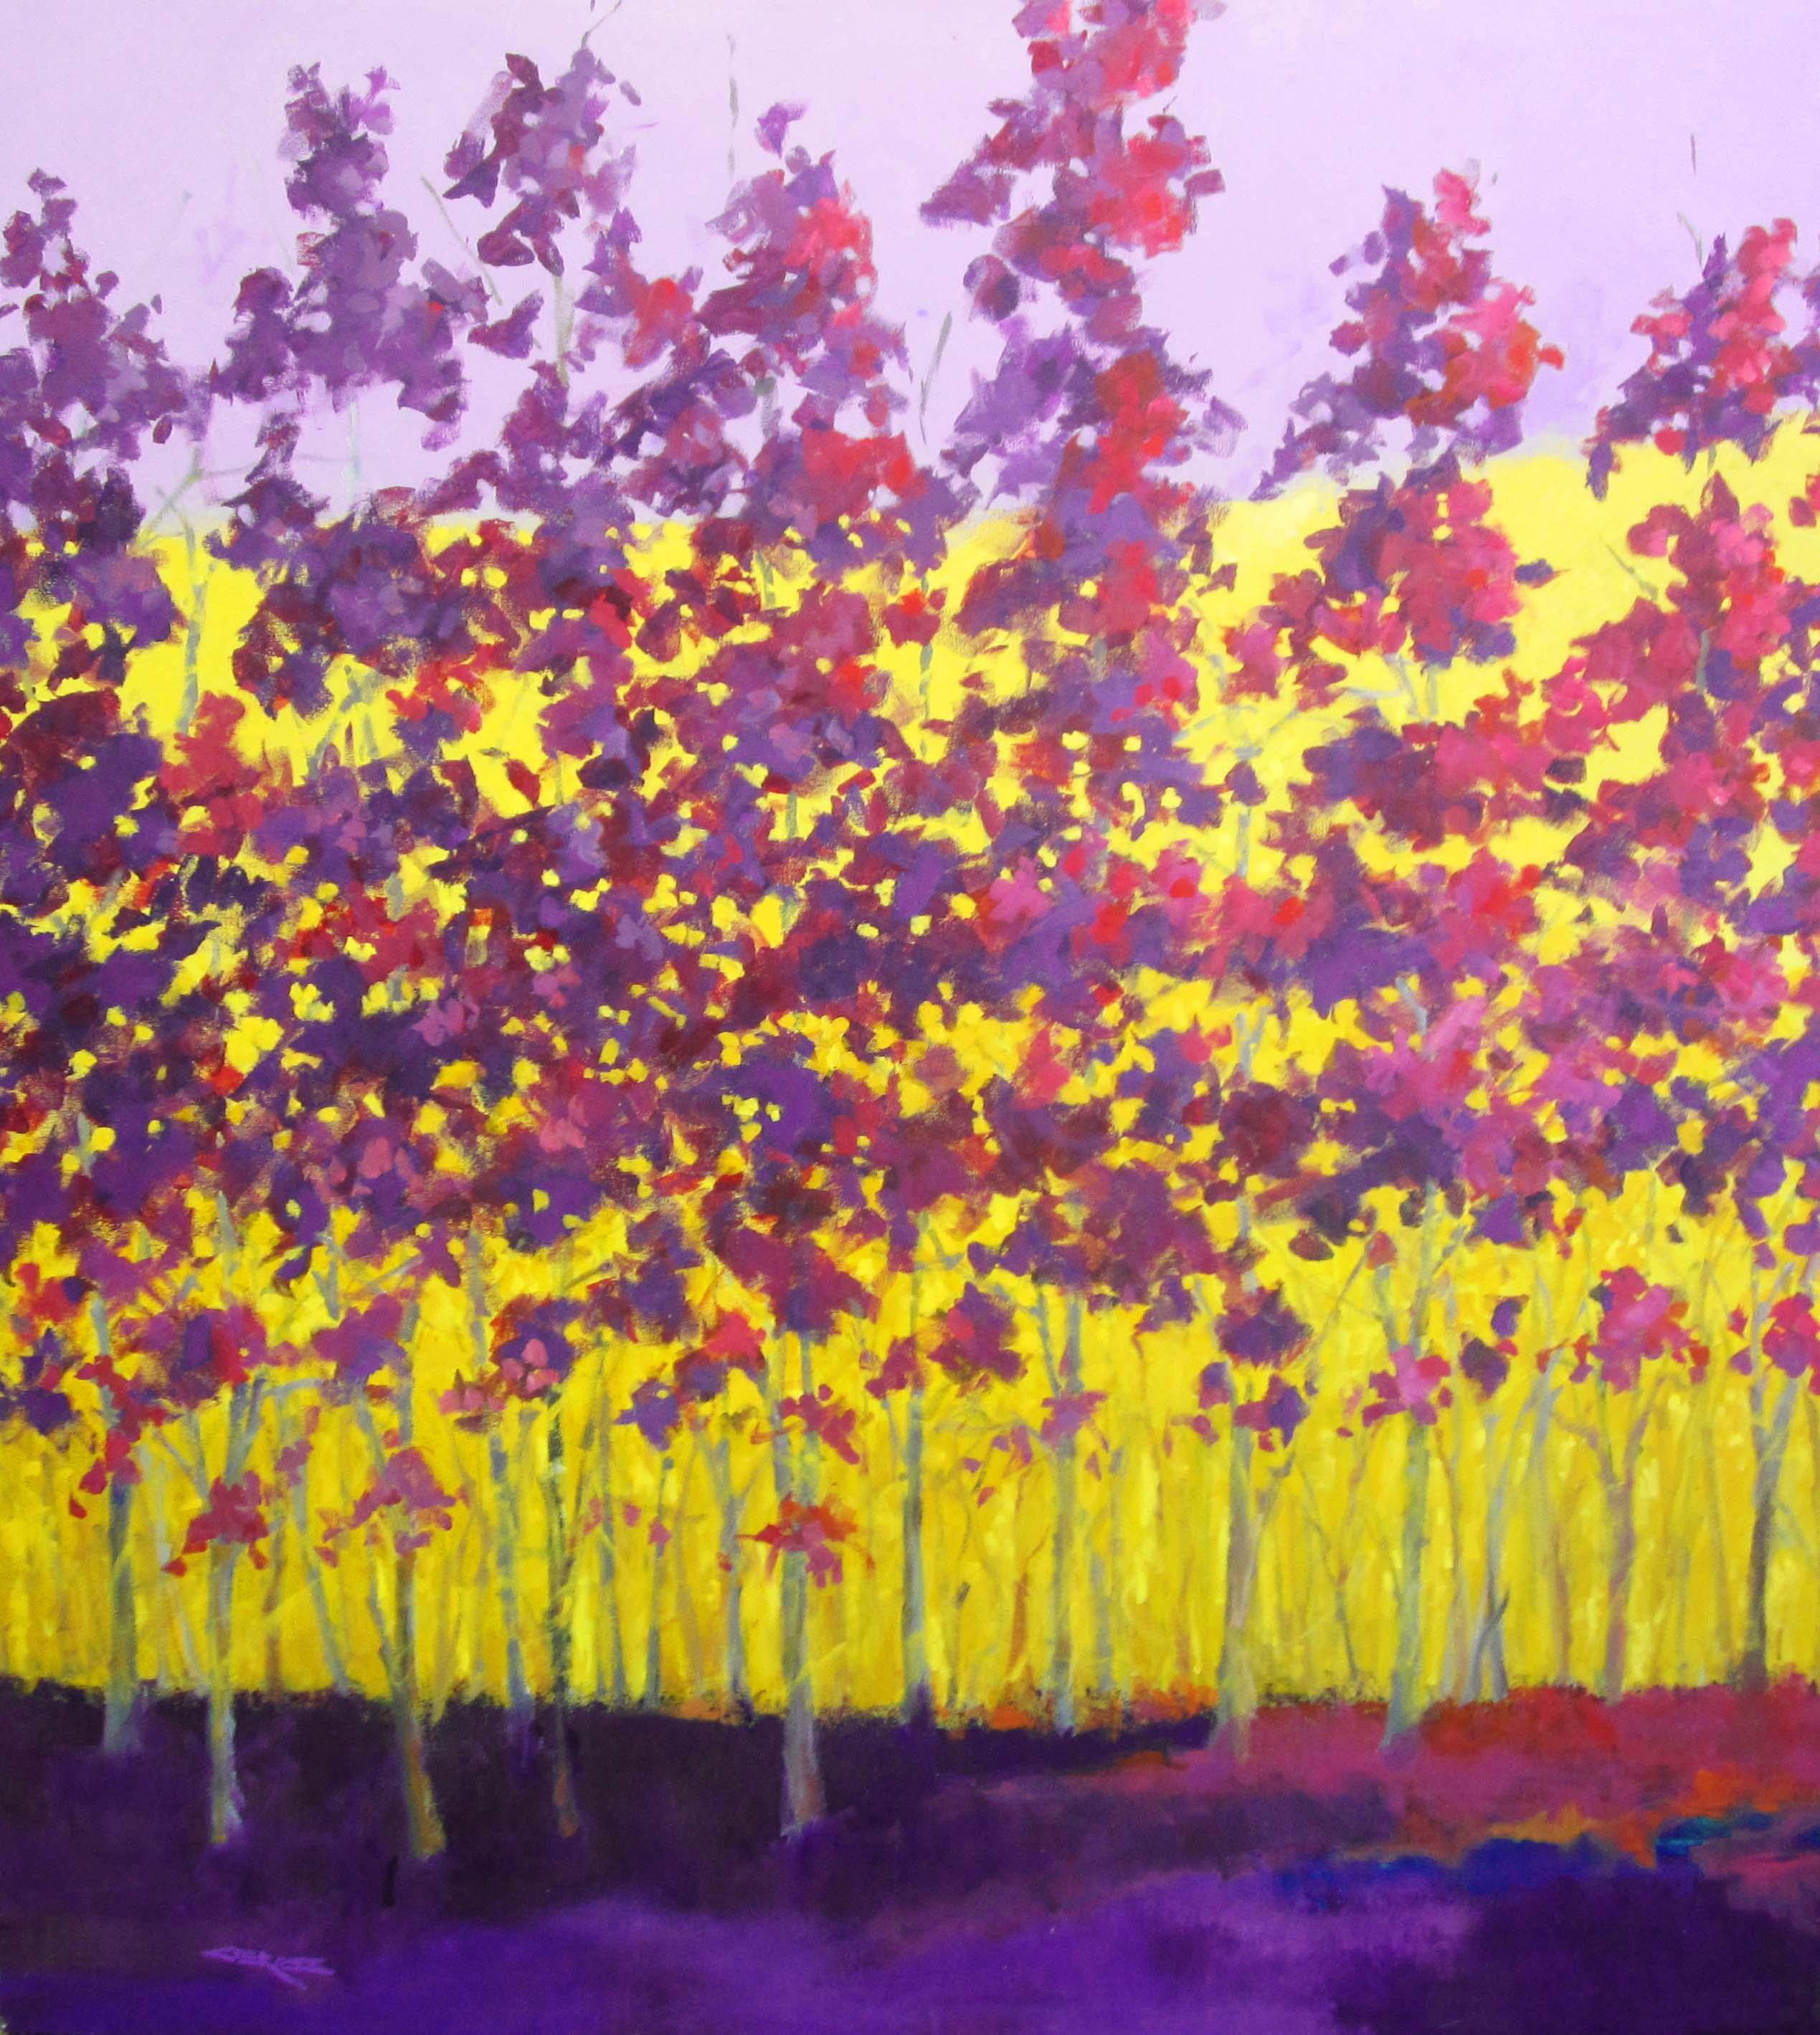 C.E. Ross, "Purple and Yellow", Colorful Abstract Landscape Acrylic on Canvas